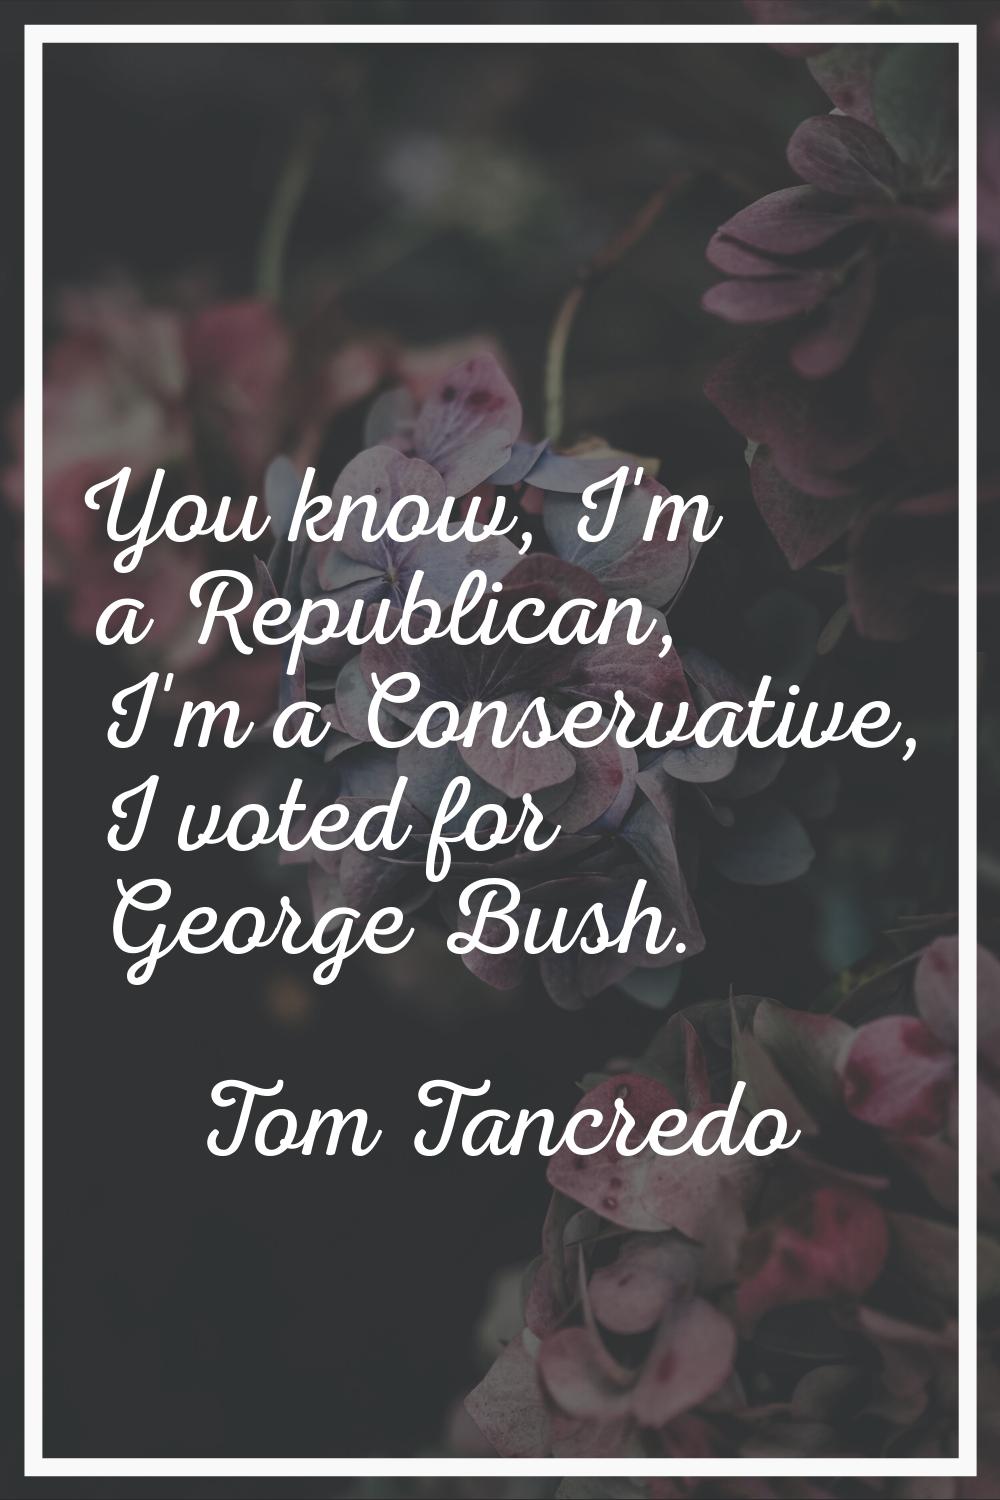 You know, I'm a Republican, I'm a Conservative, I voted for George Bush.